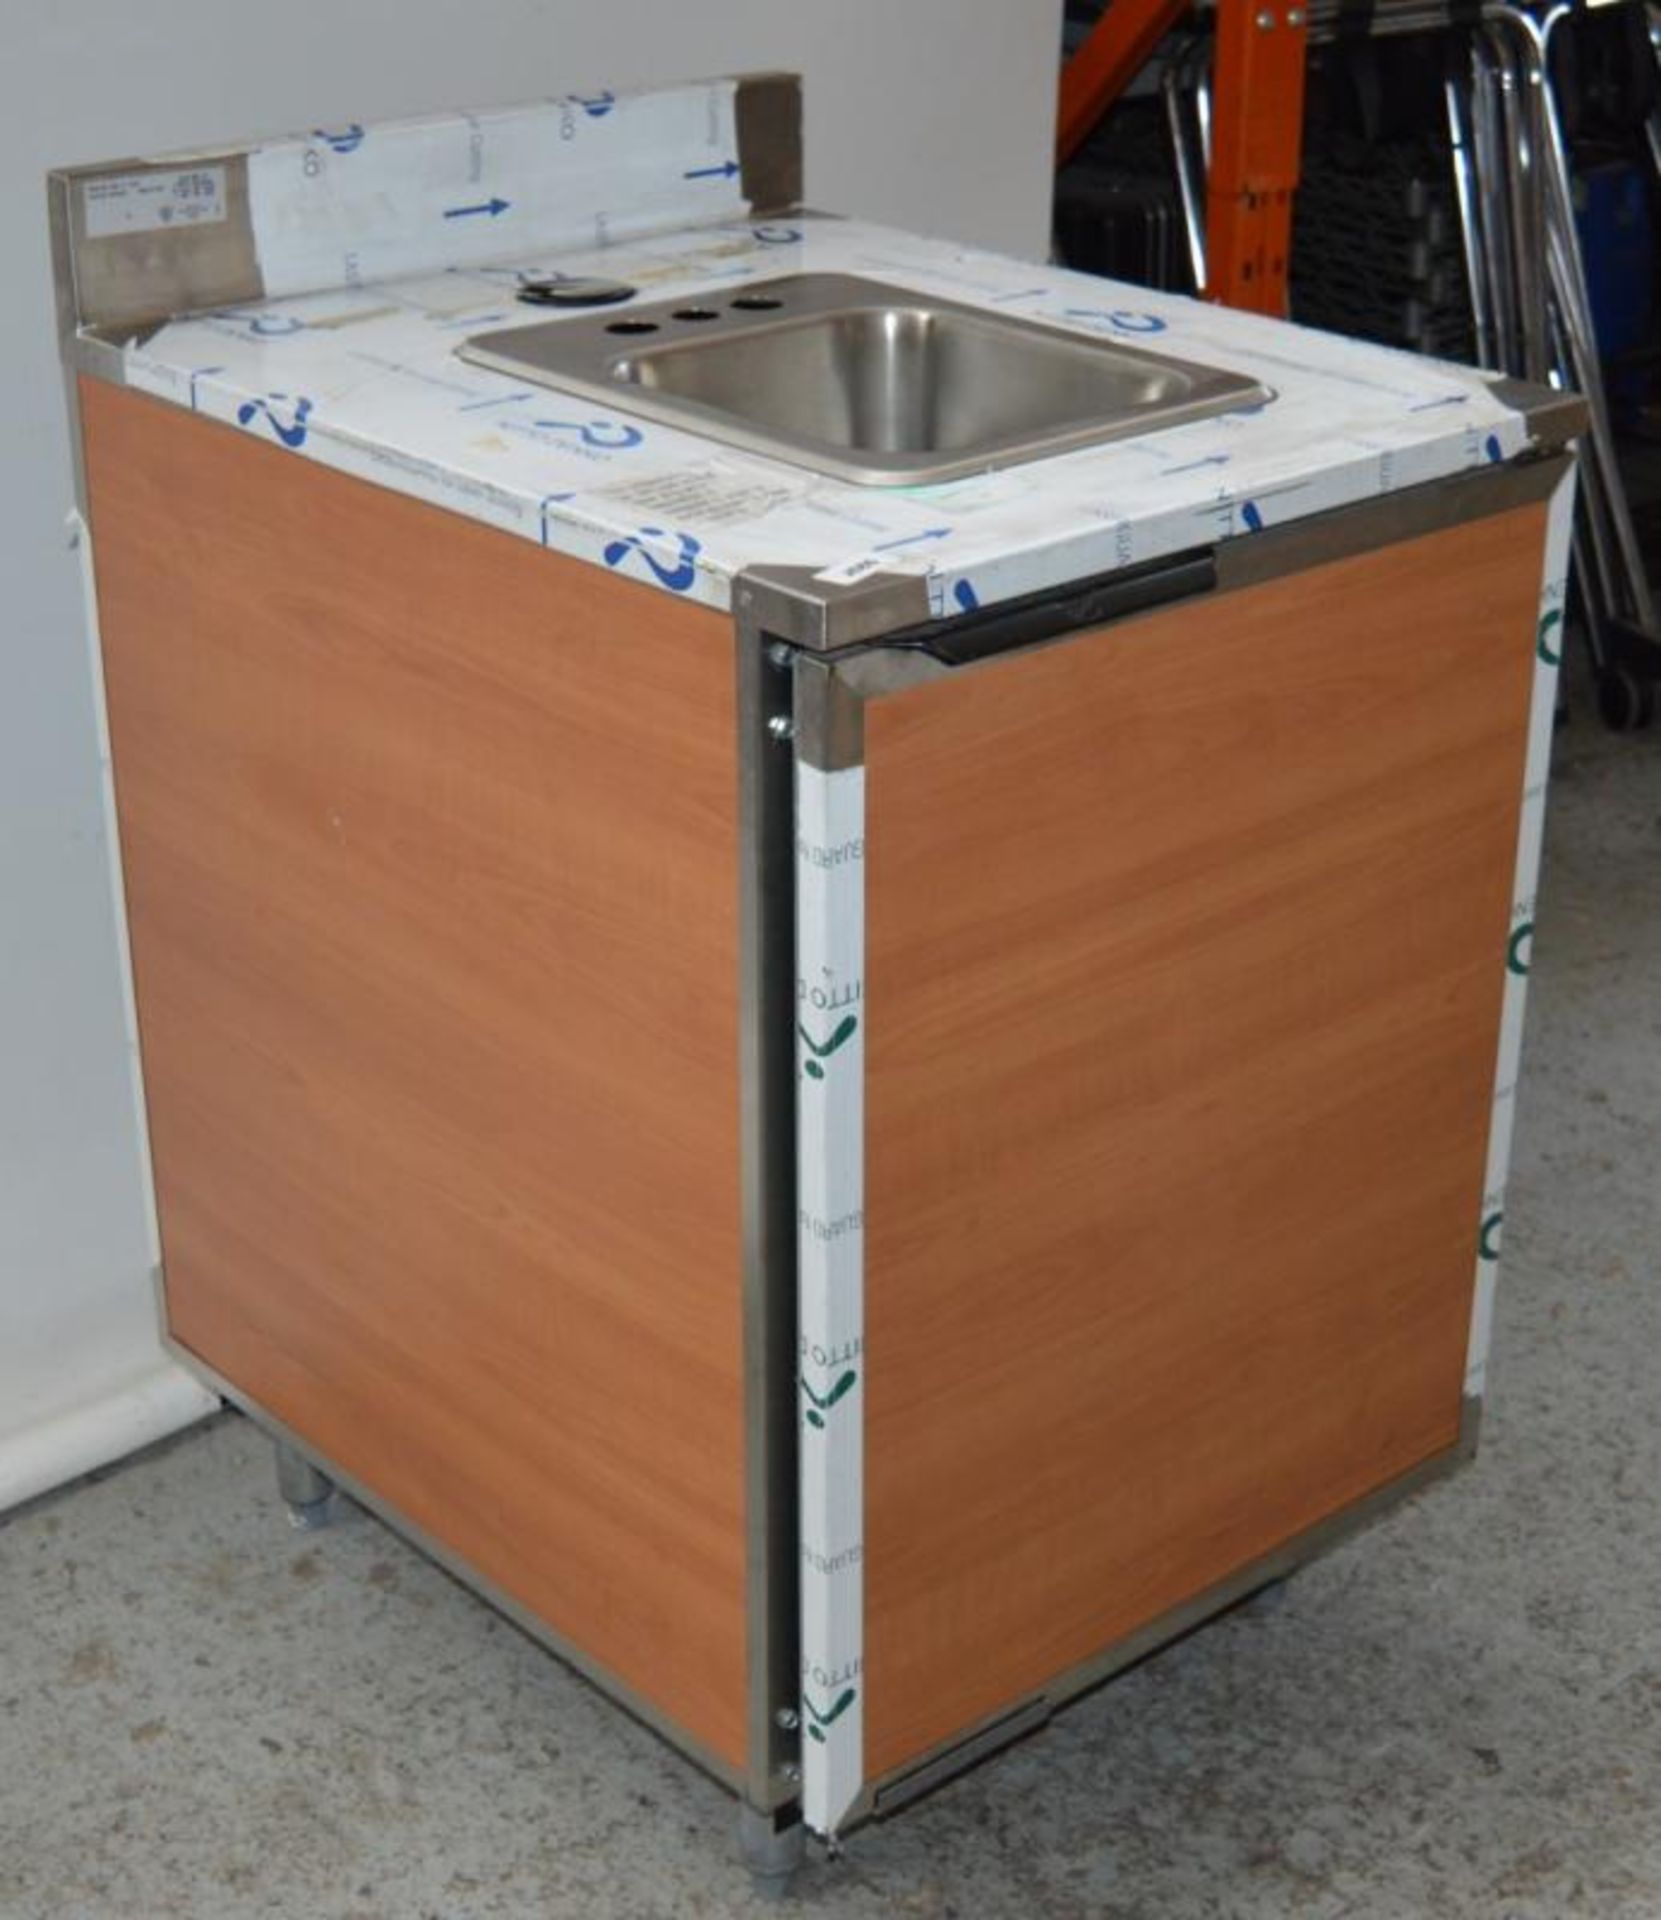 1 x Duke Stainless Steel Sink Basin Unit With Wood Finish Cabinet - Unused With Protective Film - Image 6 of 7